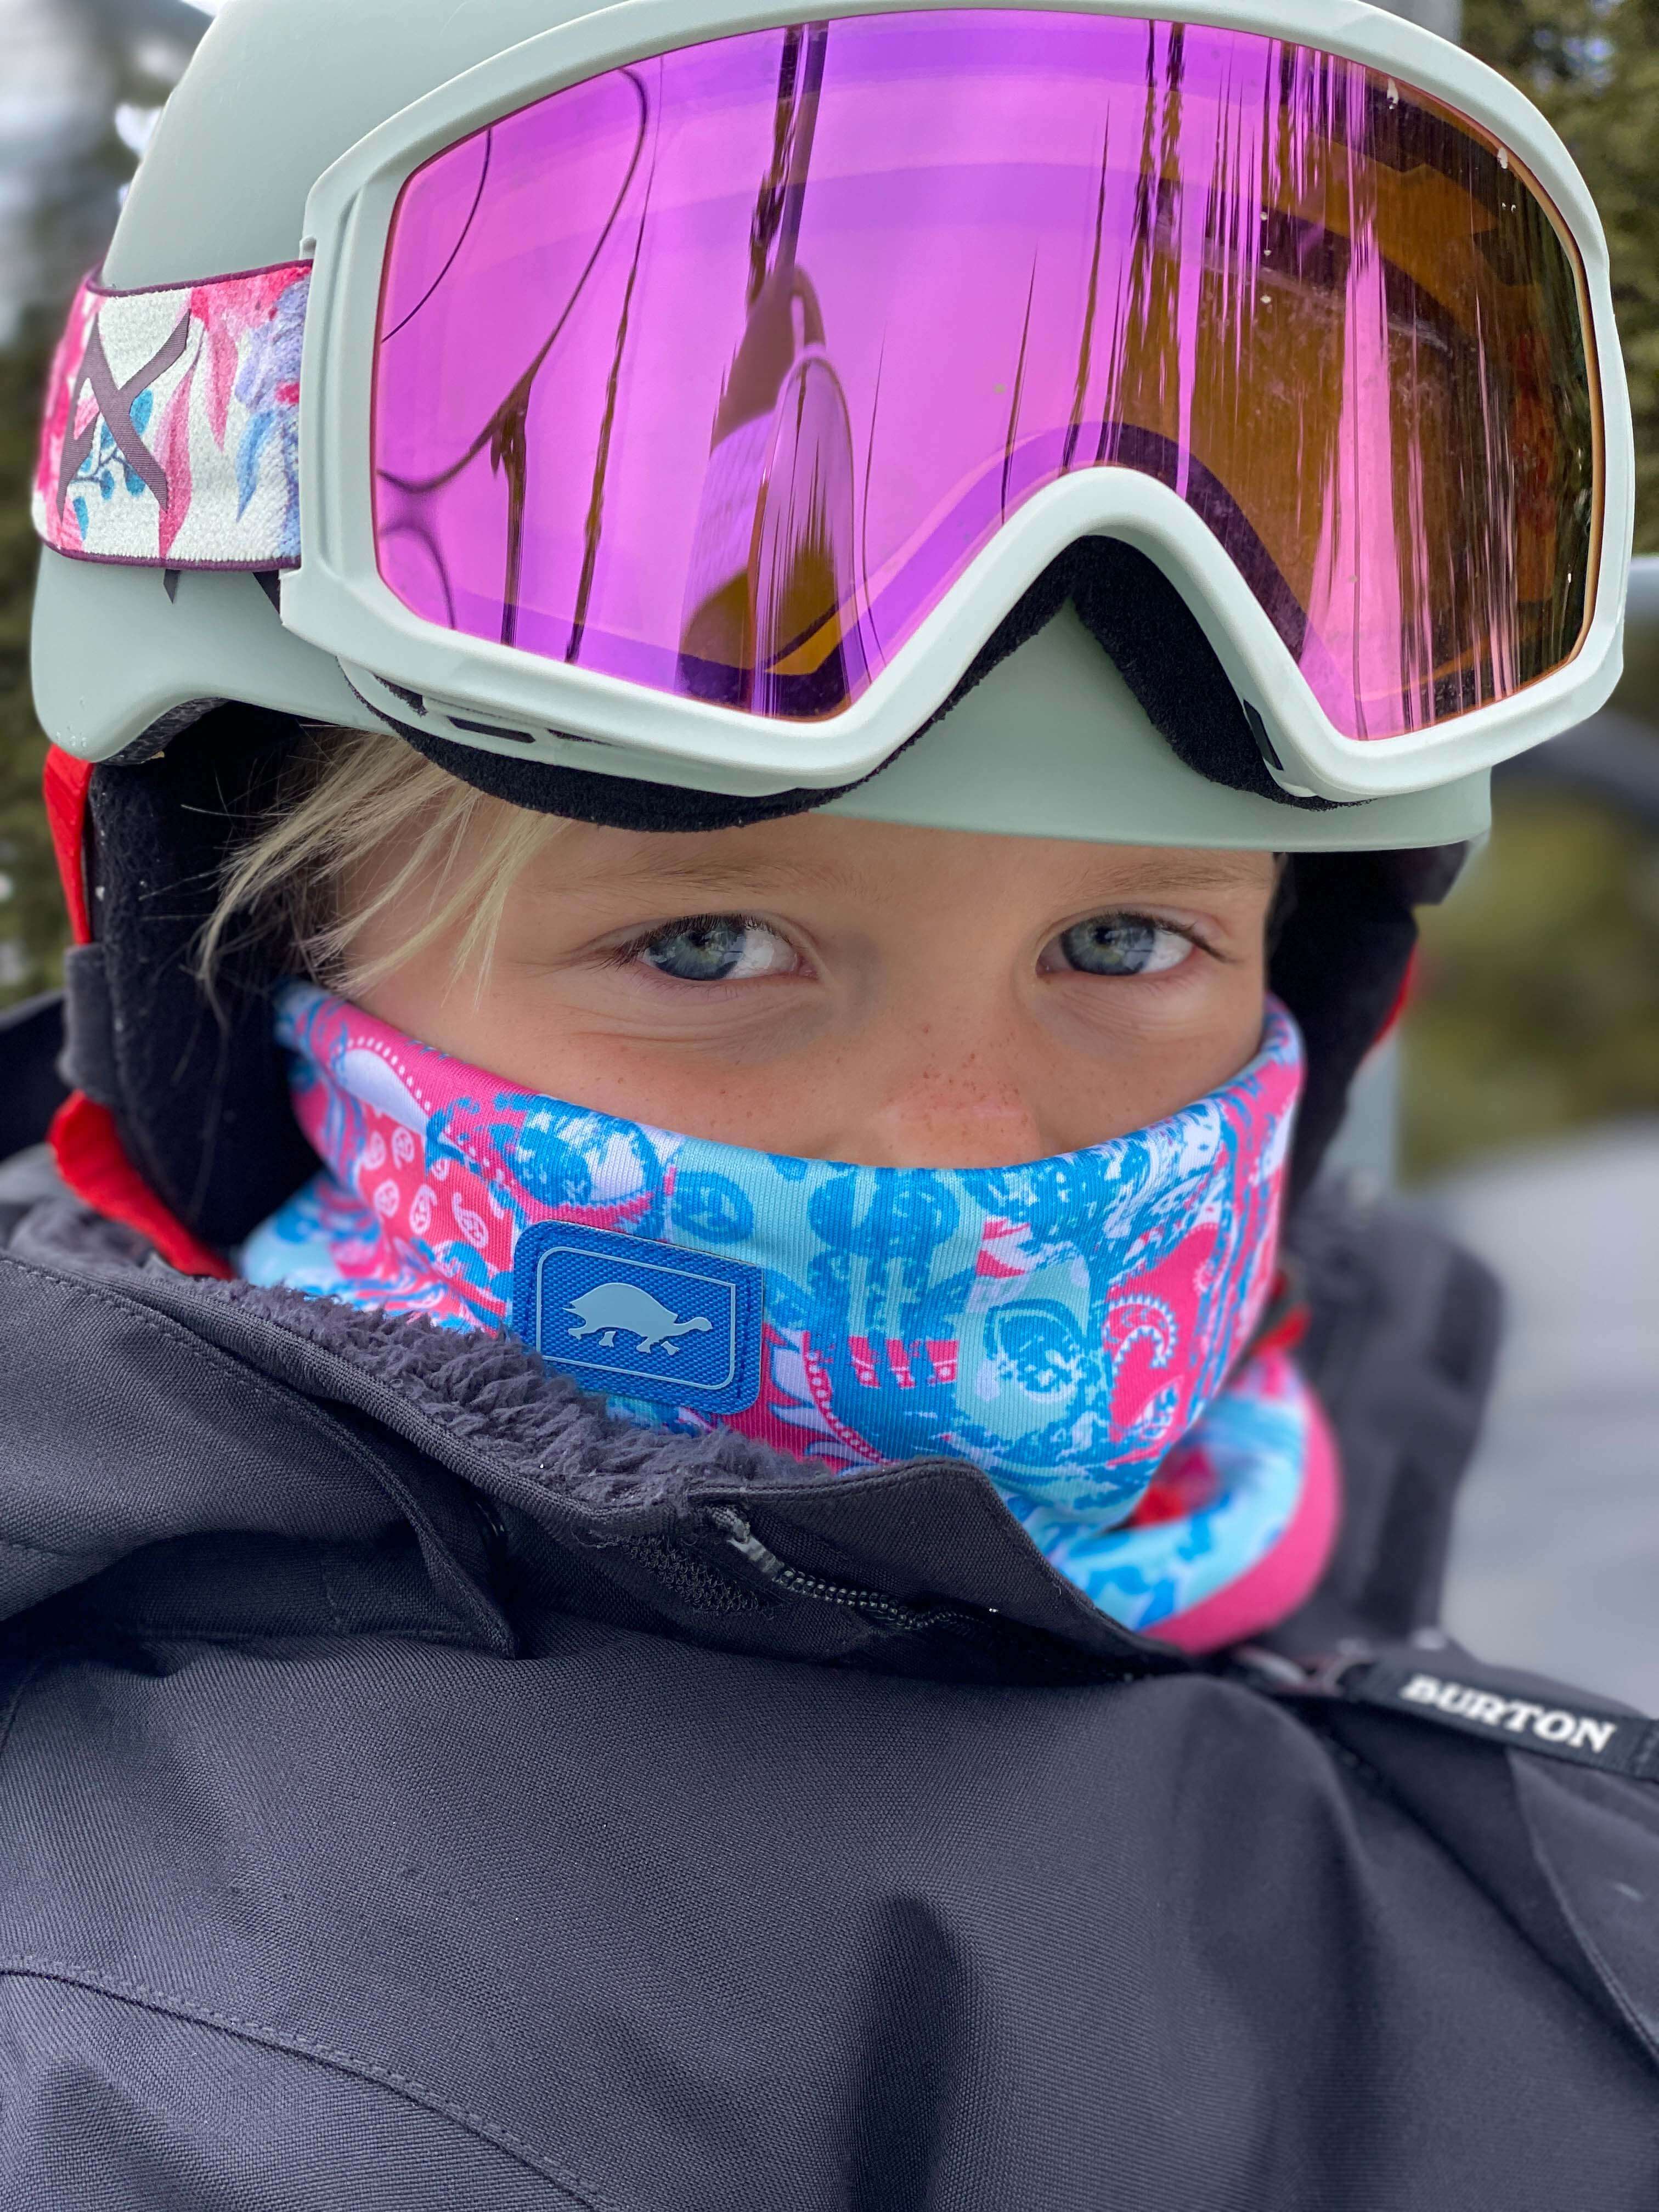 Child looking at camera with neck warmer and ski helmet